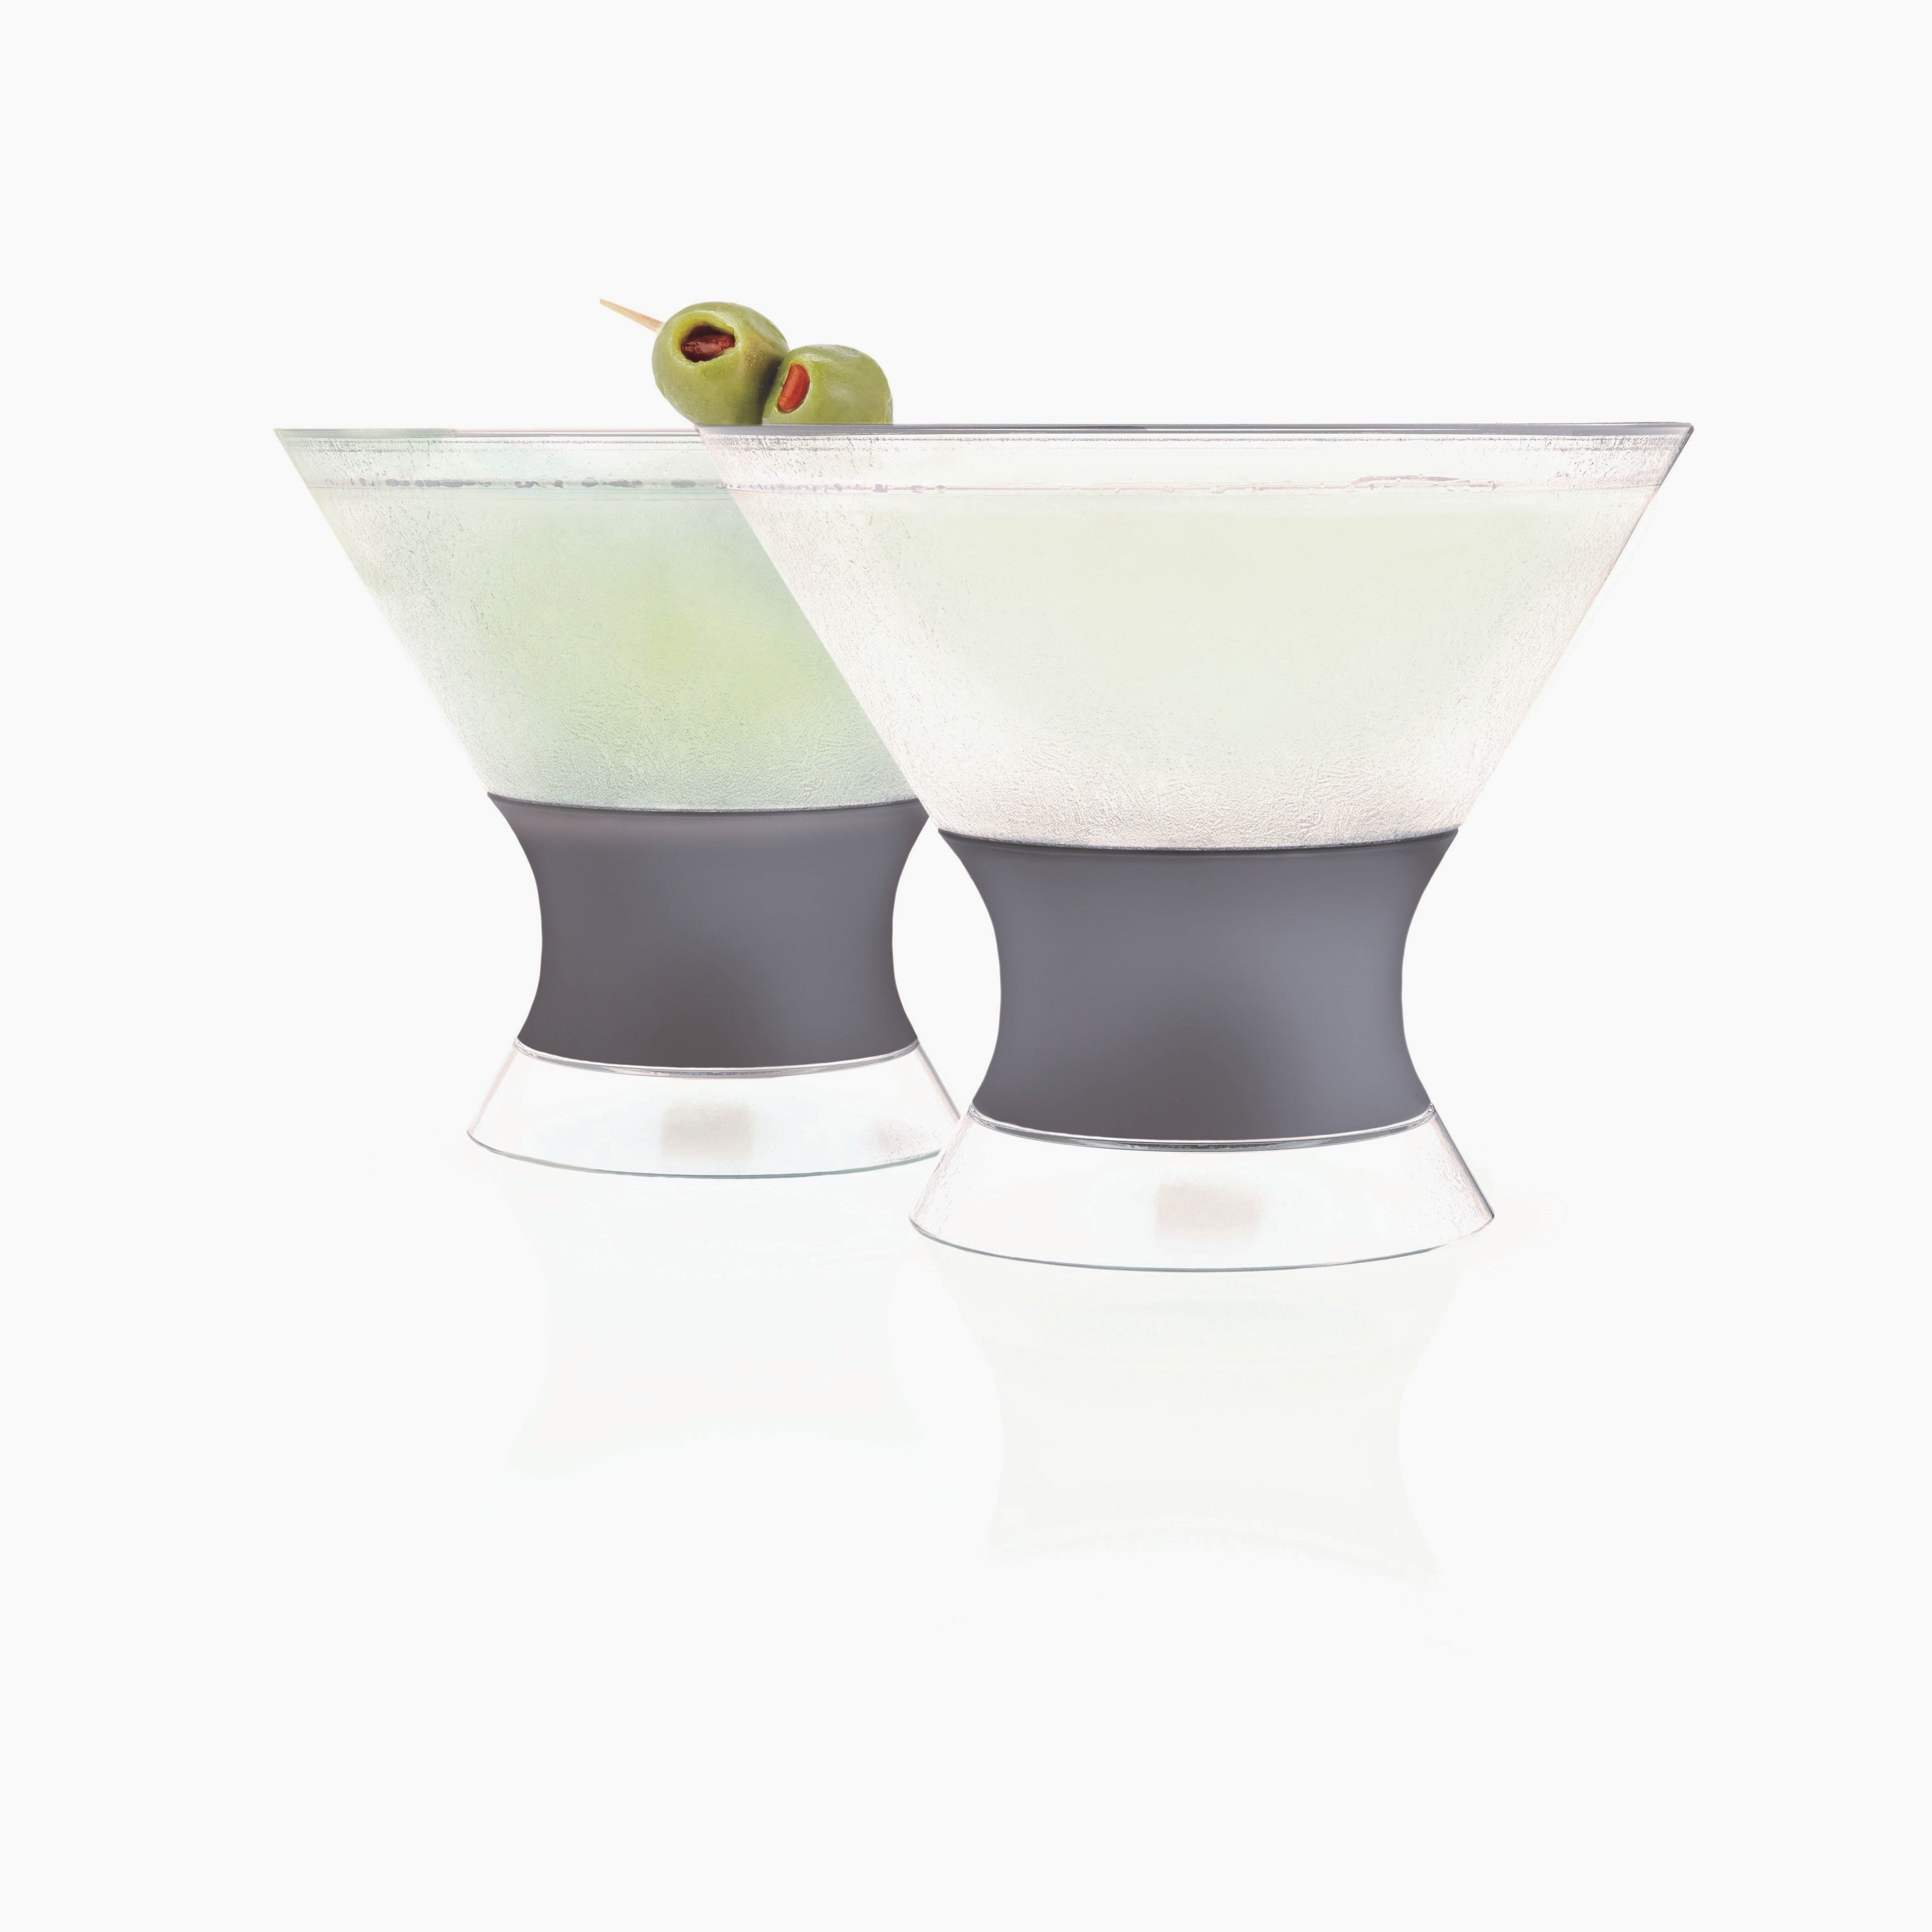 Martini FREEZE Cooling Cup in Grey, Set of 2